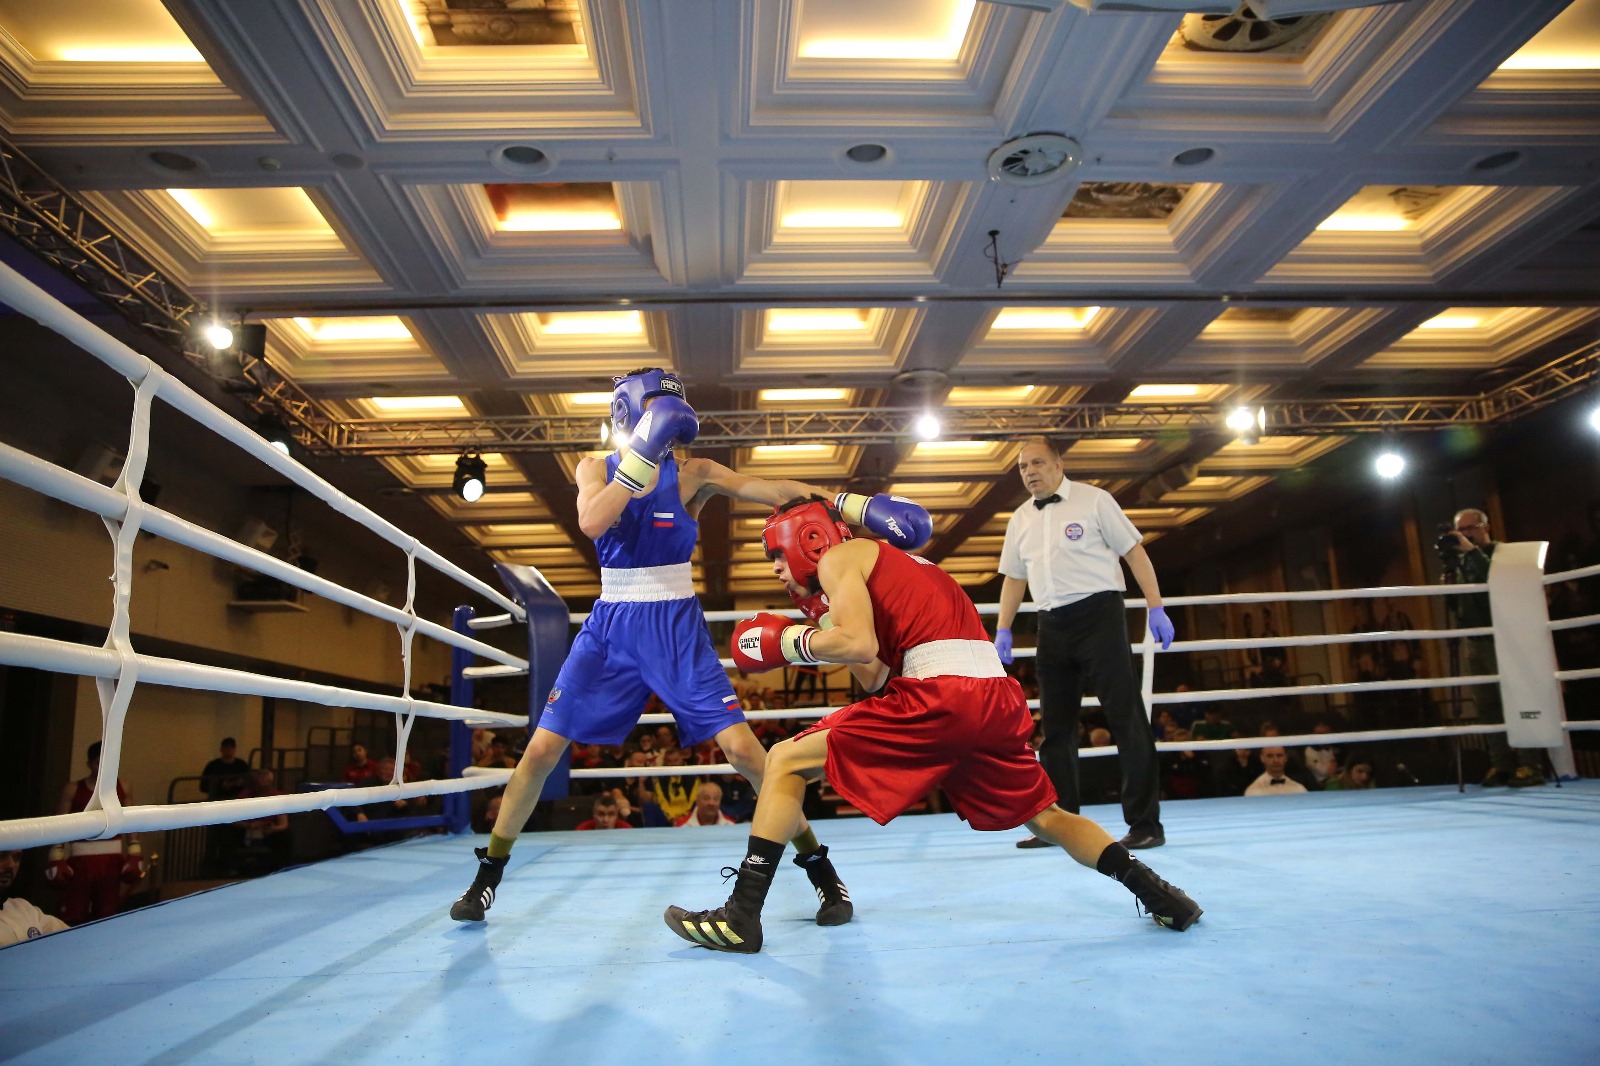 Youth World Boxing Cup is going to be massive event